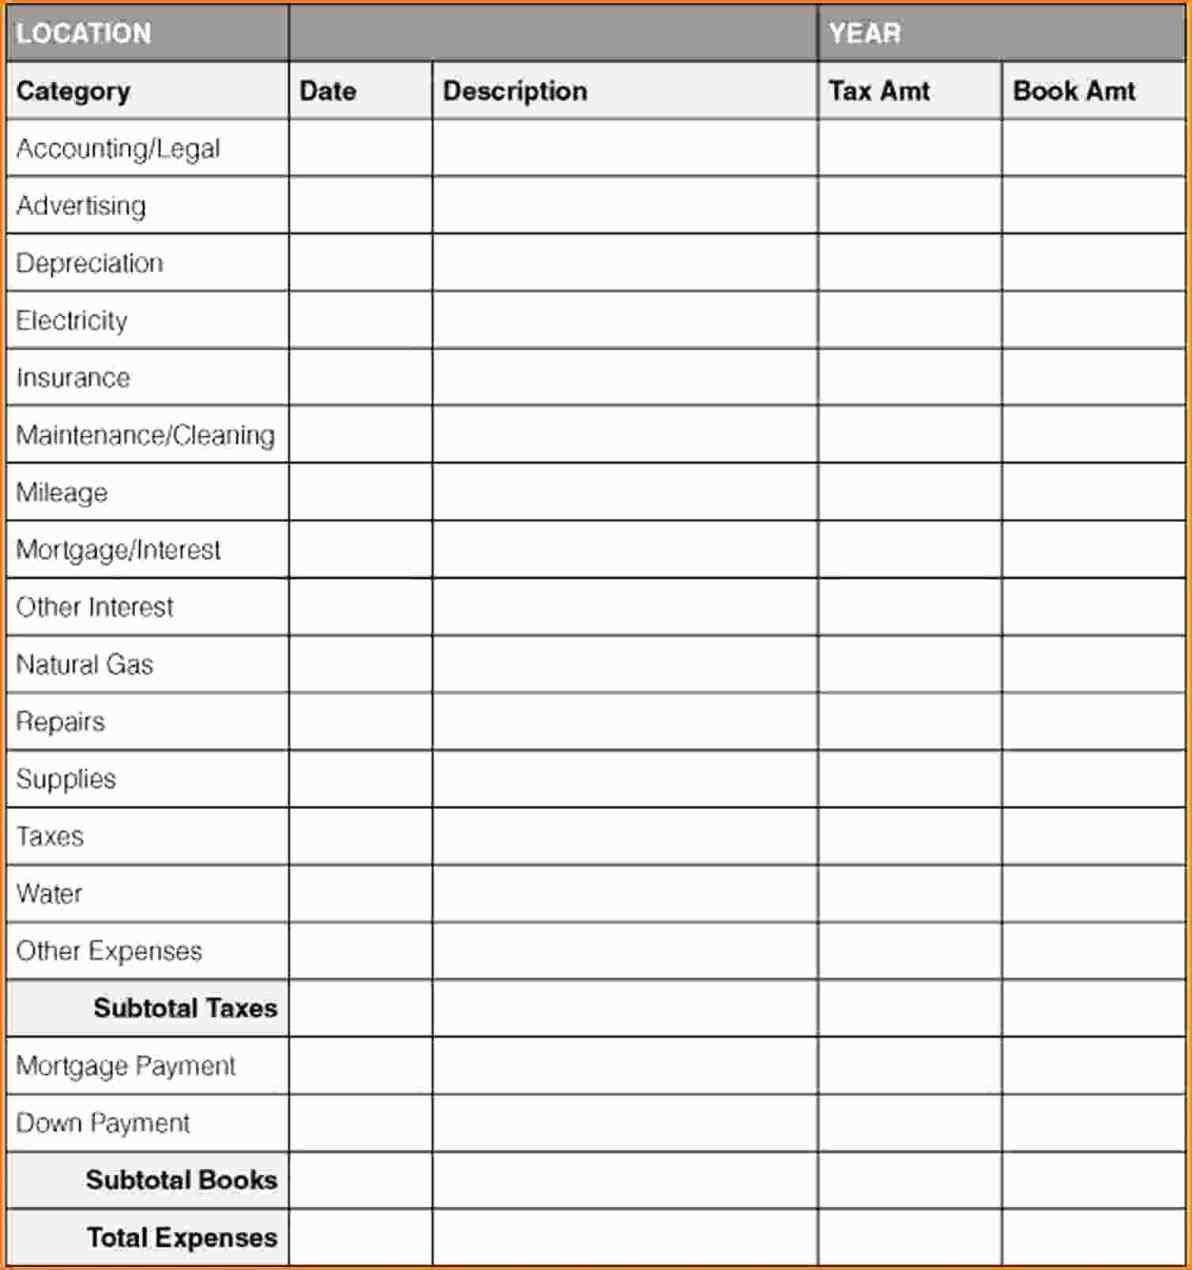 rhjosherovcom spreadsheet Excel Templates For Business Accounting for accounting in small business with excel rhjosherovcom of lovely rheccosus excel Excel Templates